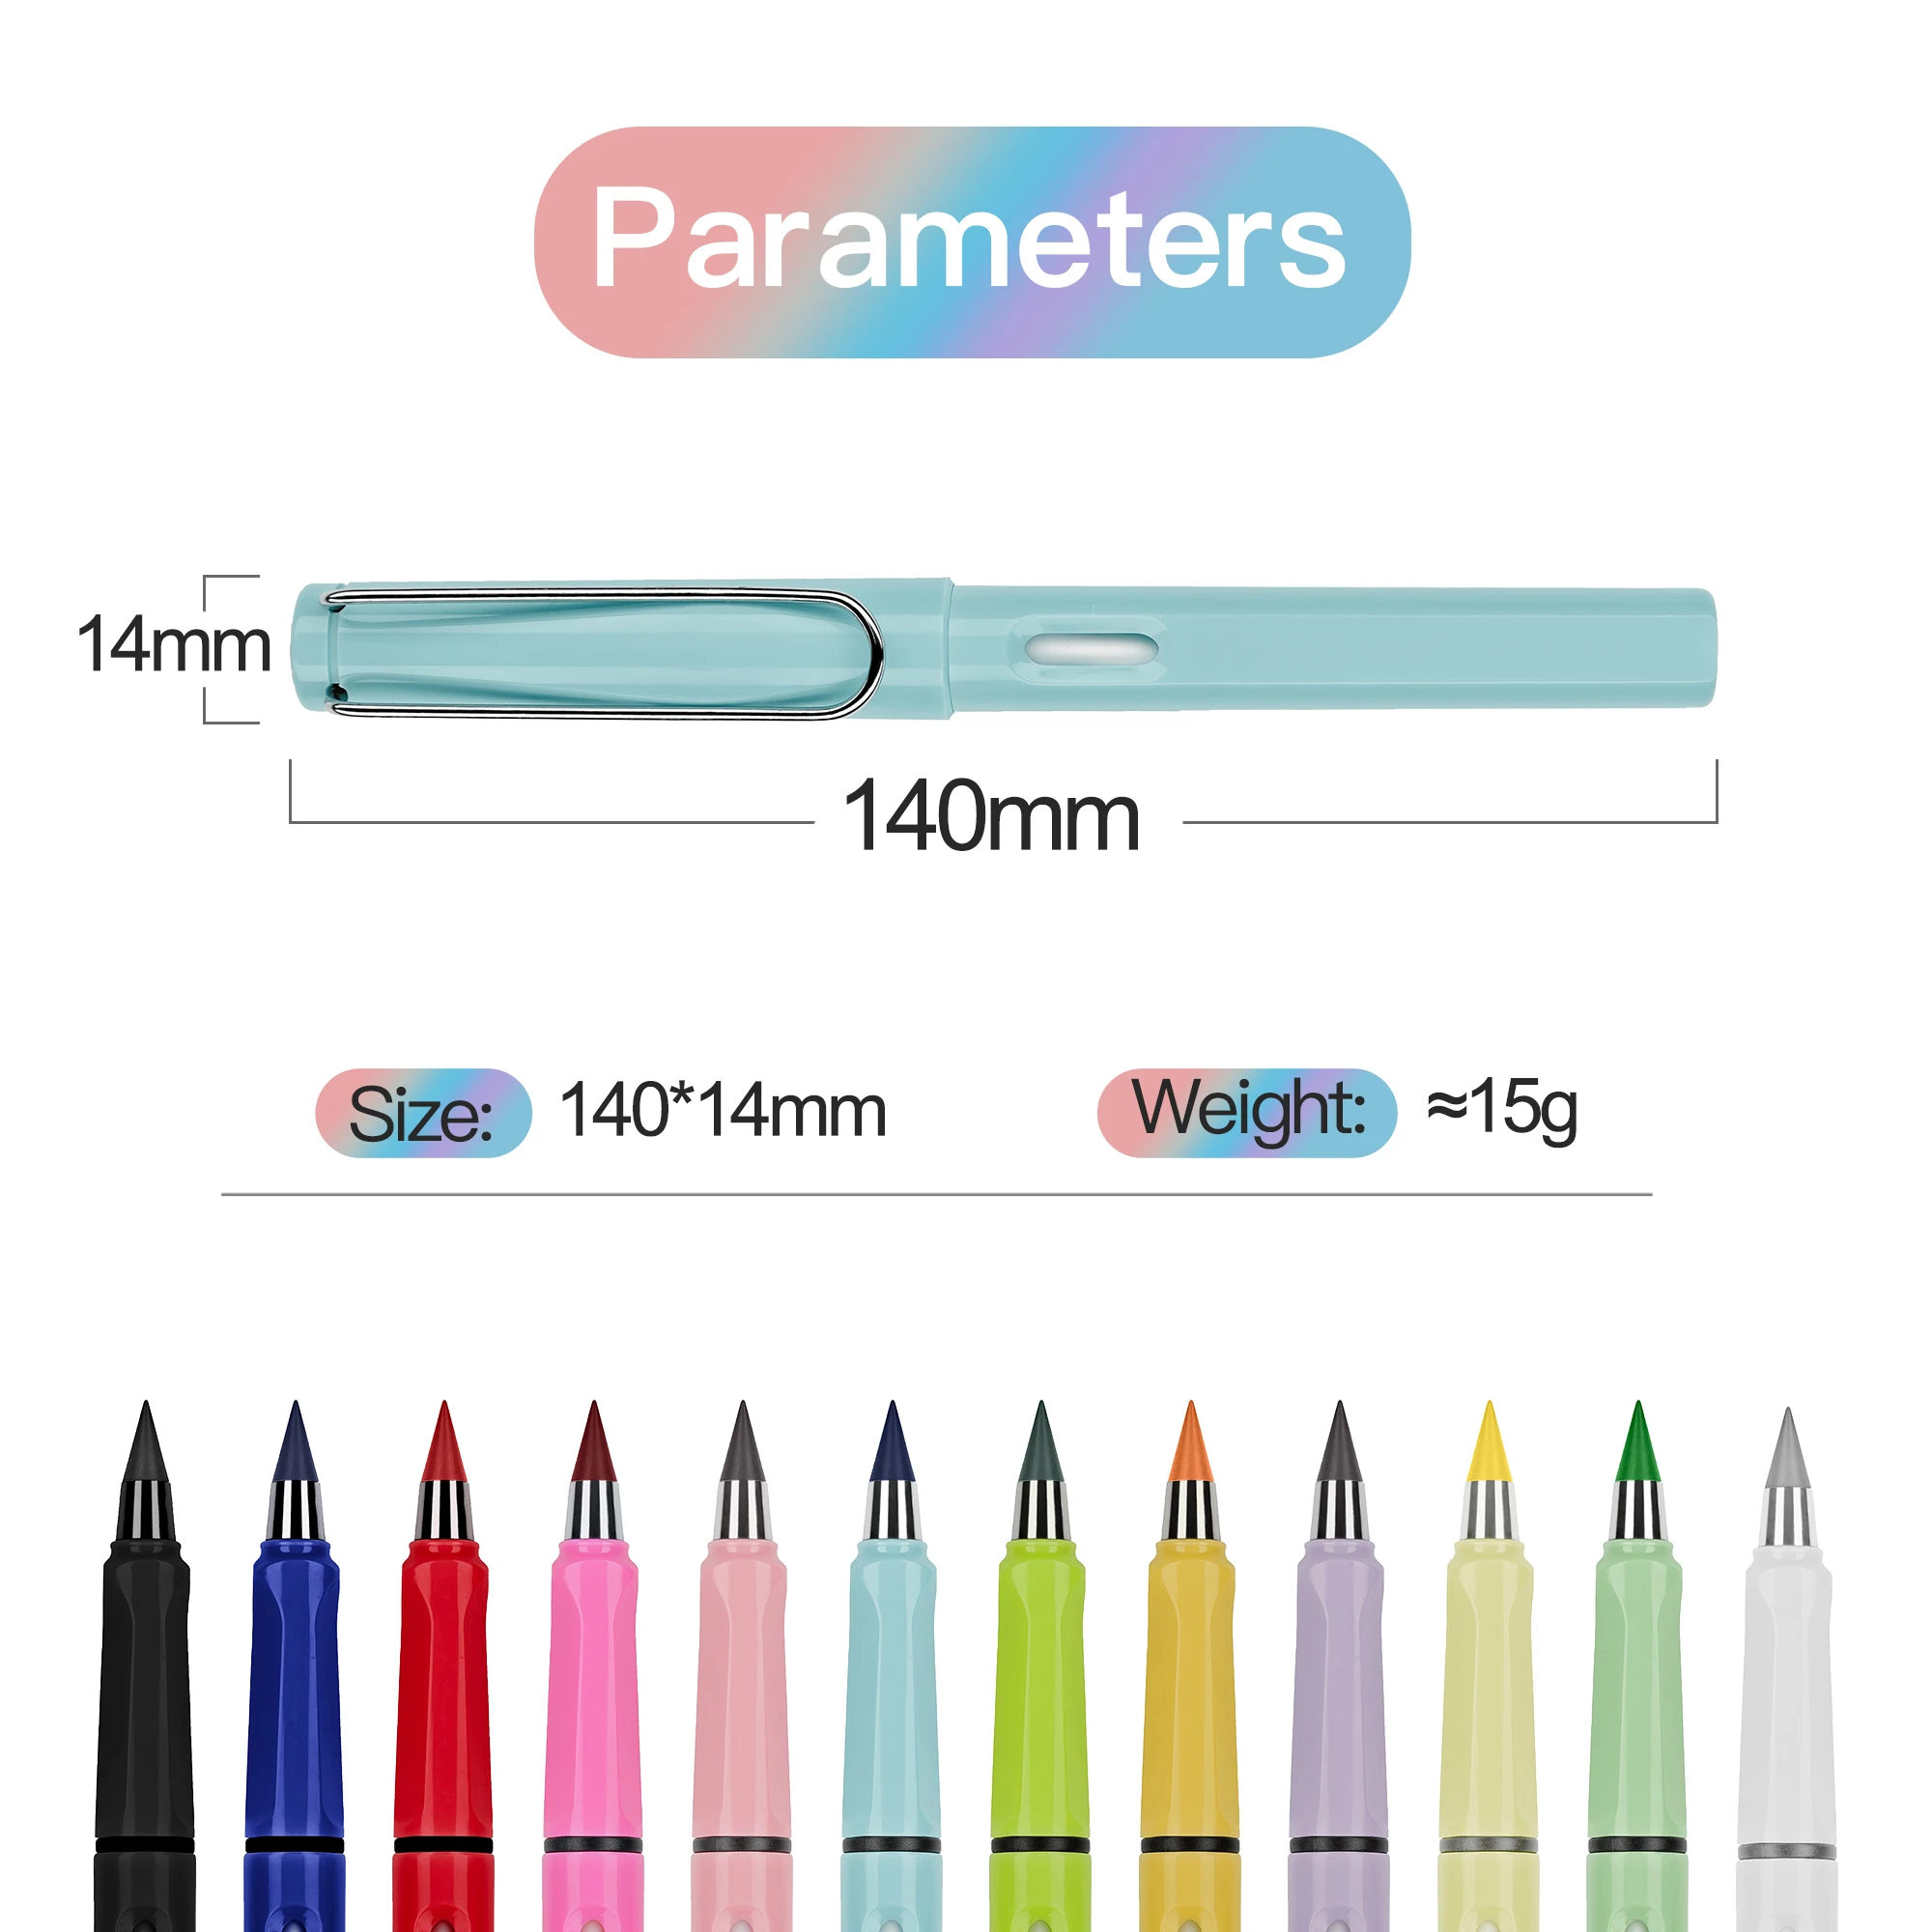 Inkless Eternal Pencil Everlasting Infinity Pencil with Eraser, Eternal Pencil For School Office for Writing, Sketch, Drawing